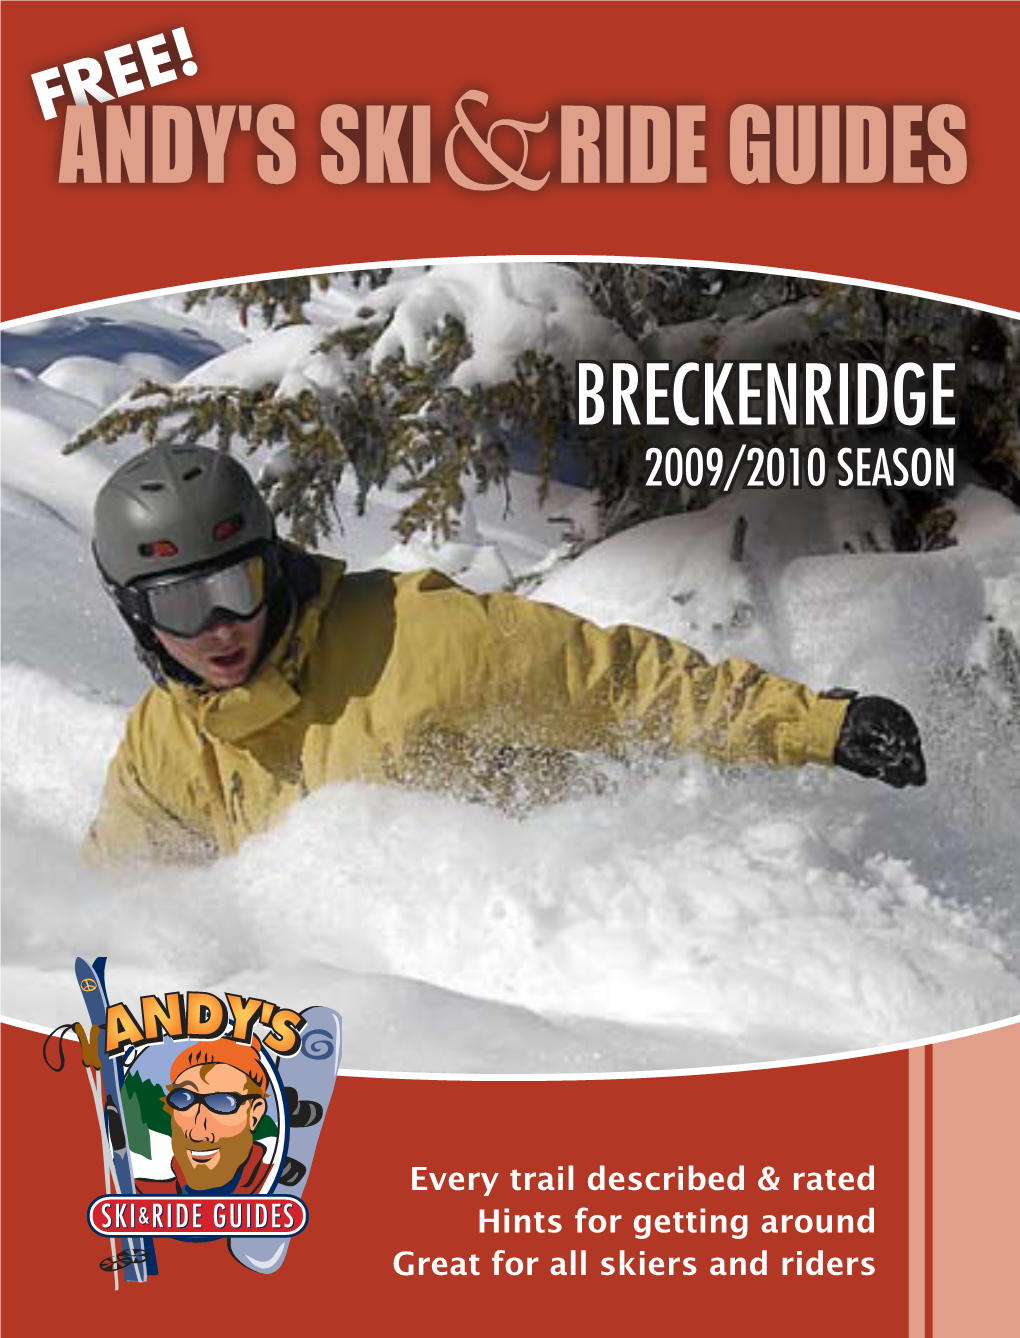 Andy's Ski&Ride Guides